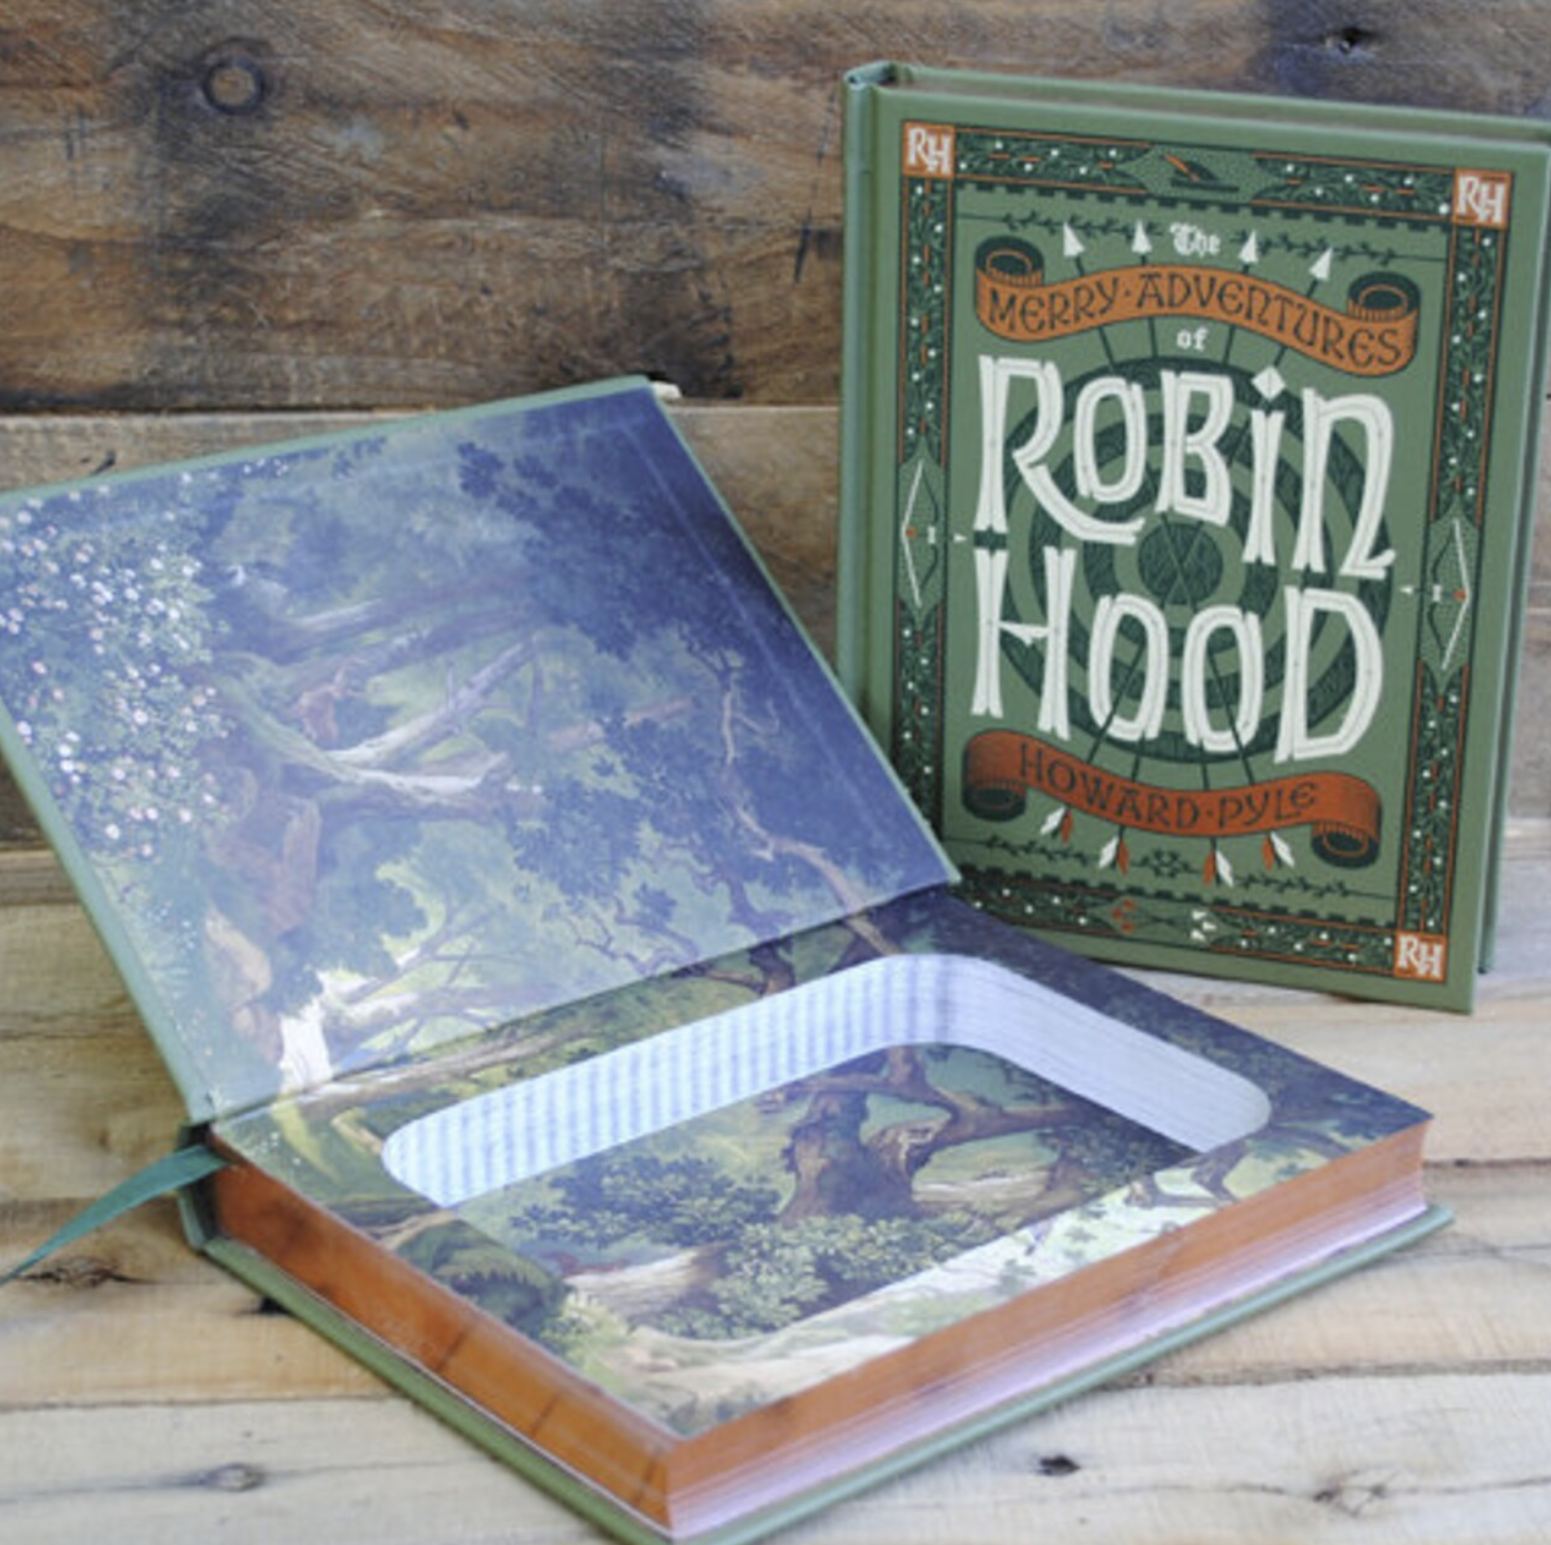 Image of an open book with endpapers illustrated with forest imagery and carved out into a book safe. The closed version featuring the green cover of Robin Hood by Howard Pyle stands next to the open book.